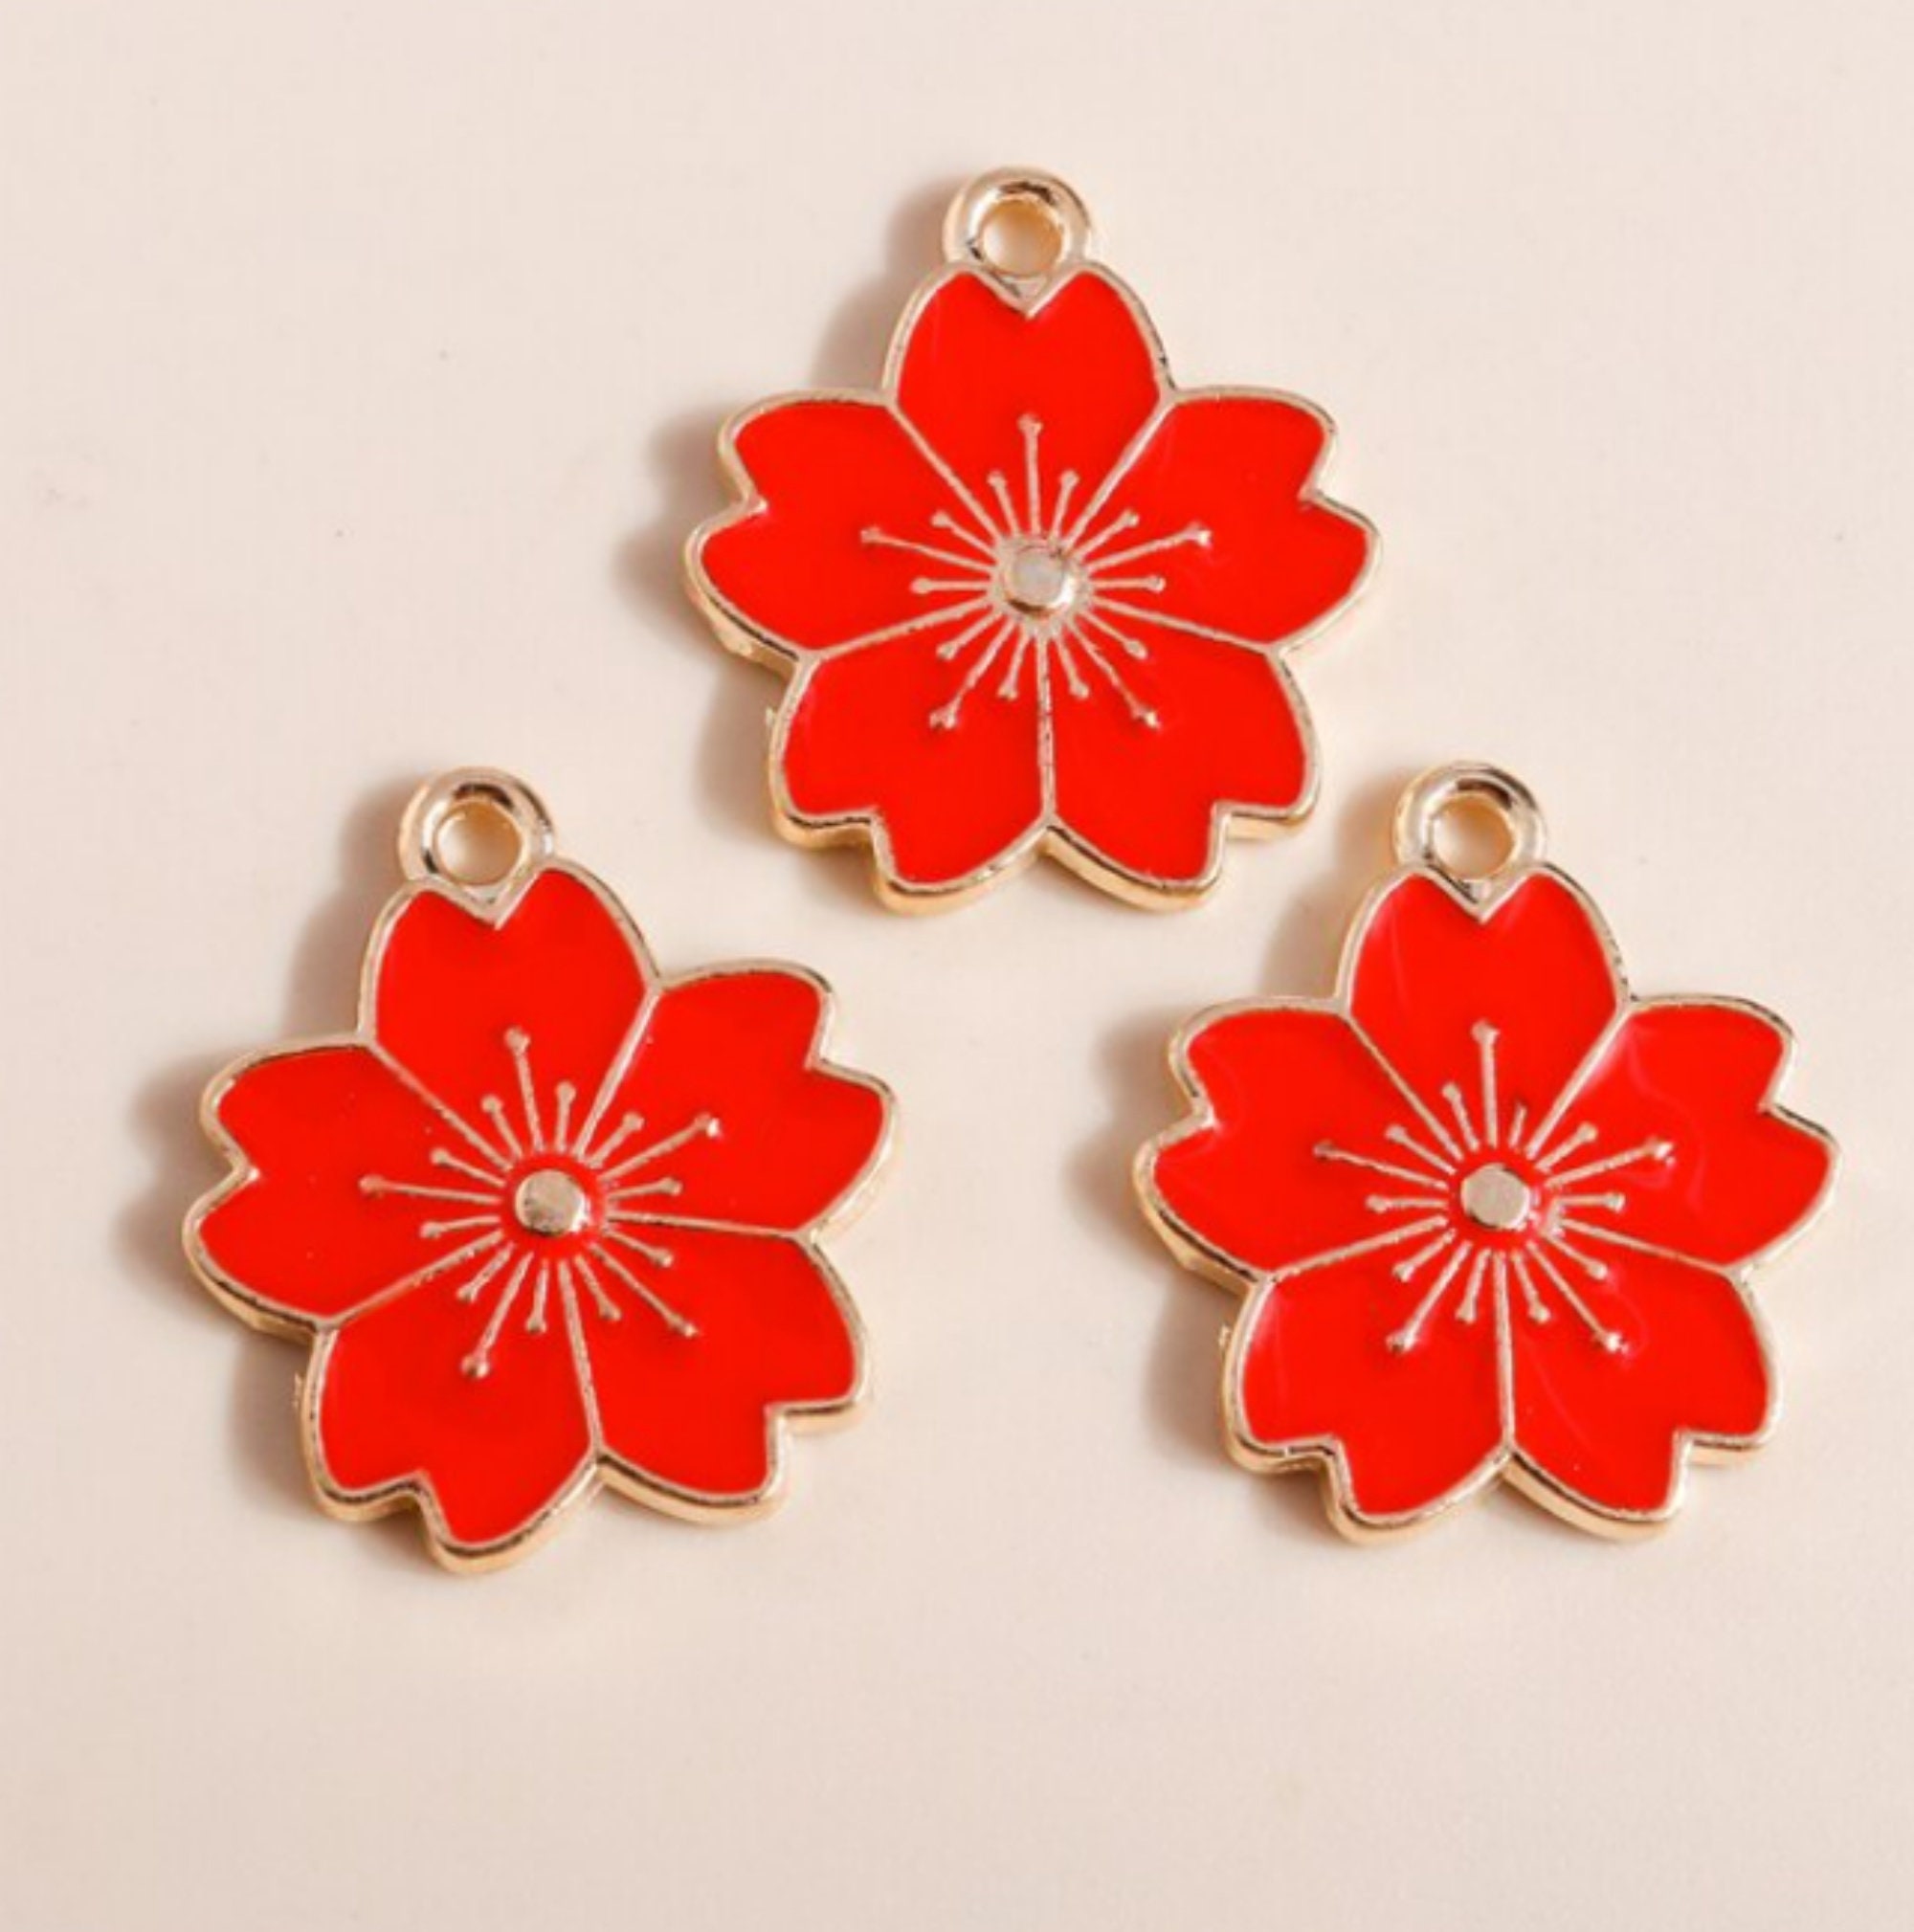 10pcs Enamel Flower Charm for Jewelry Making Supplies Necklace Pendant  Earring Charms Diy Craft Accessories Metal Materials - ArtistPose - Shop  for special, extraordinary items, from unique handcrafted pieces to unique  art.